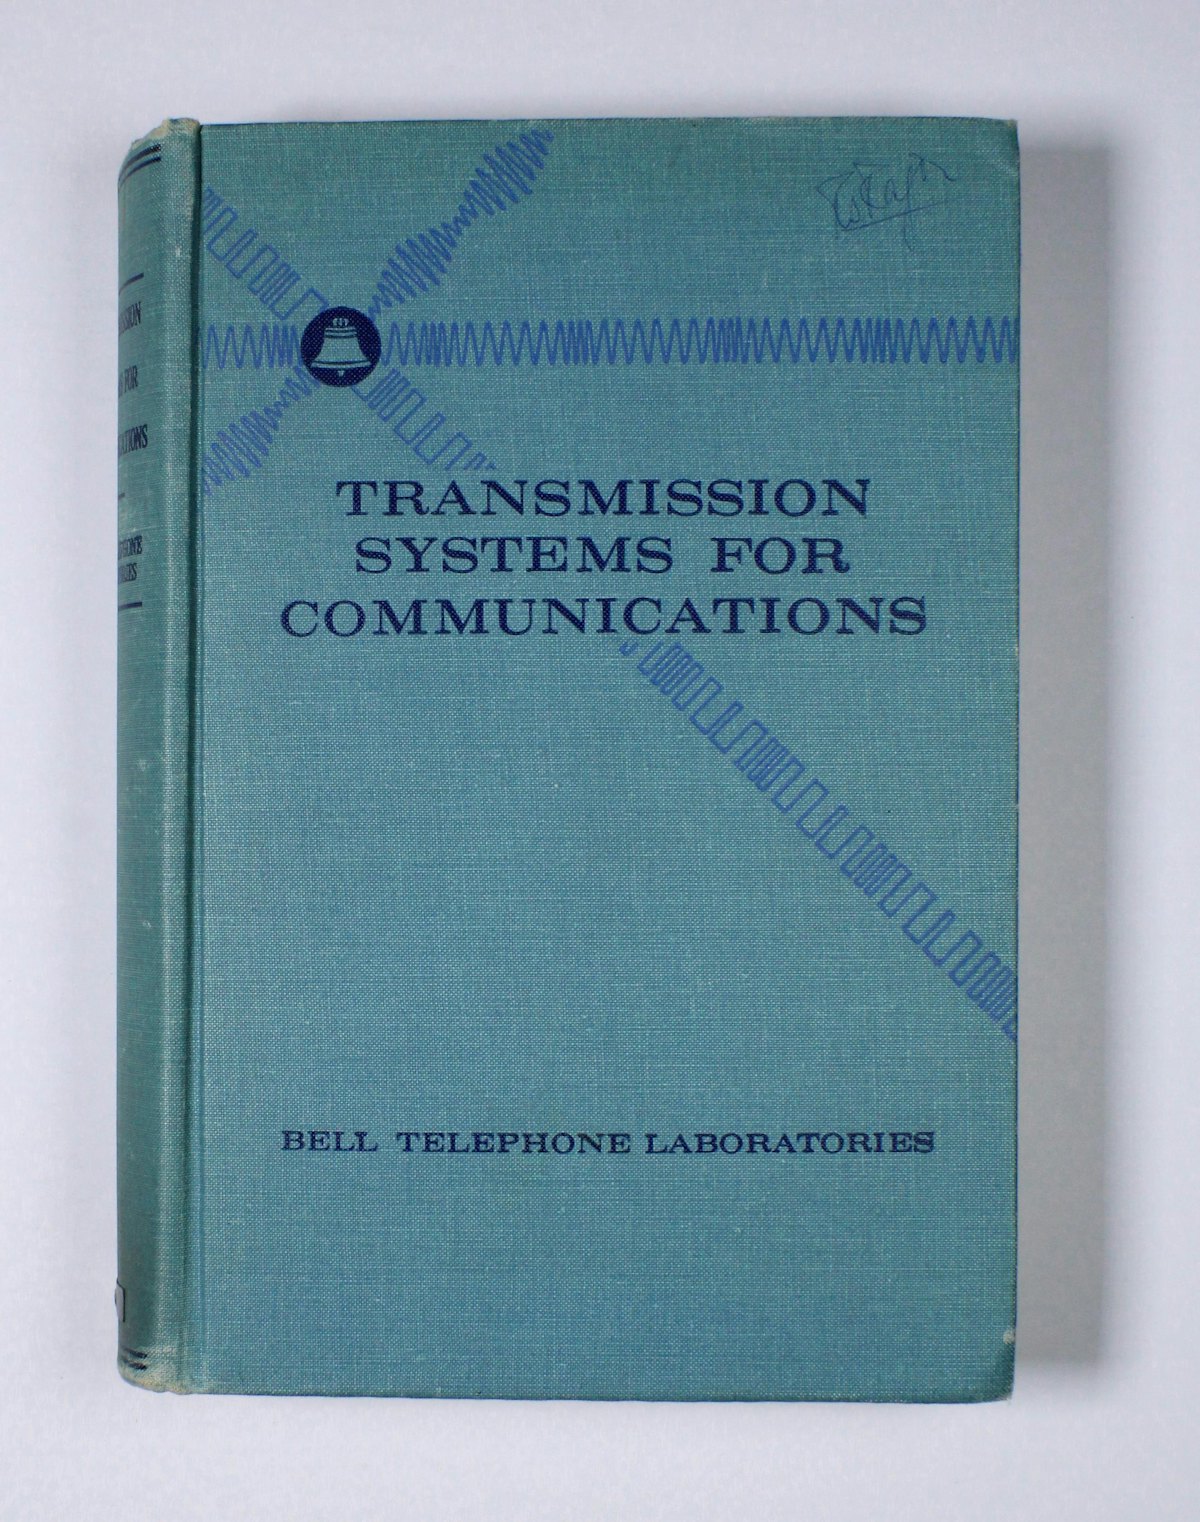 Transmission Systems for Communications